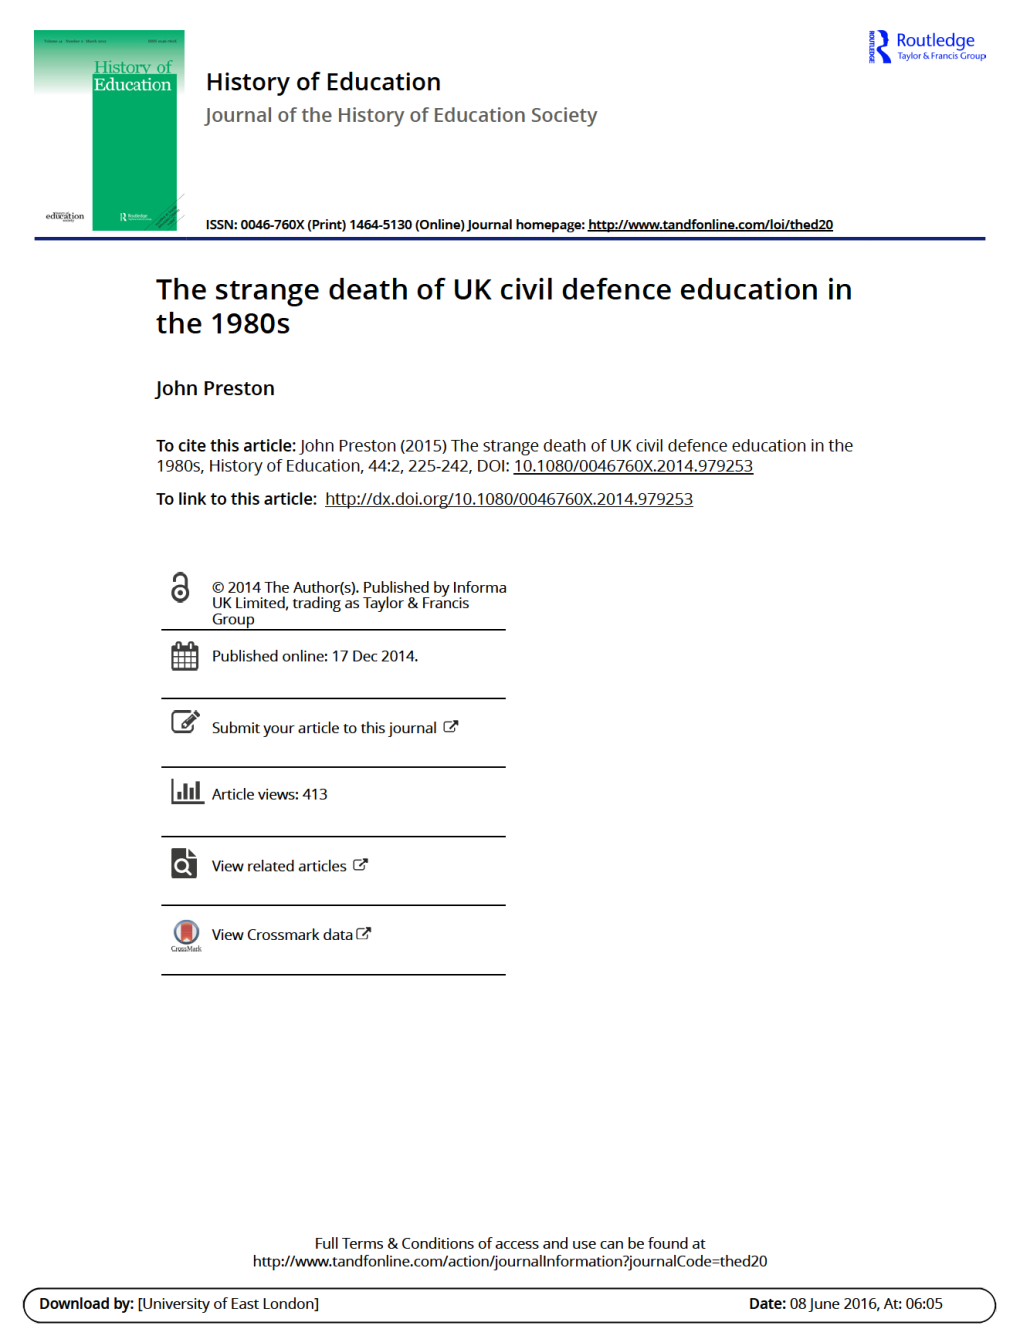 The Strange Death of UK Civil Defence Education in the 1980S